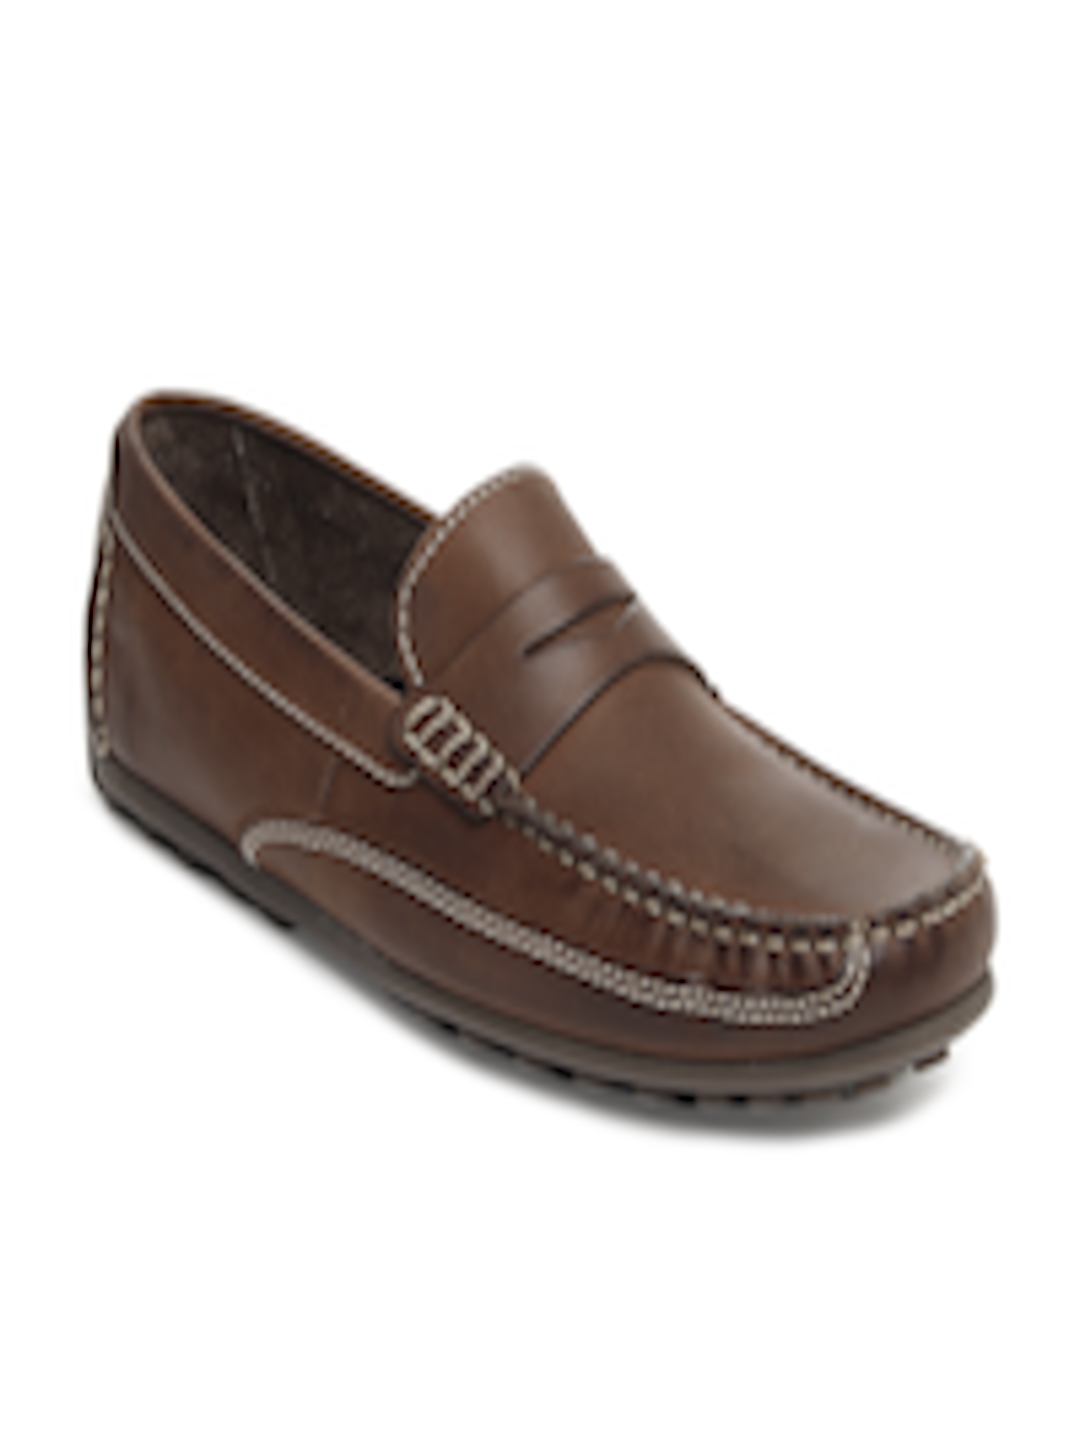 Buy Clarks Men Brown Leather Loafers - Casual Shoes for Men 229937 | Myntra